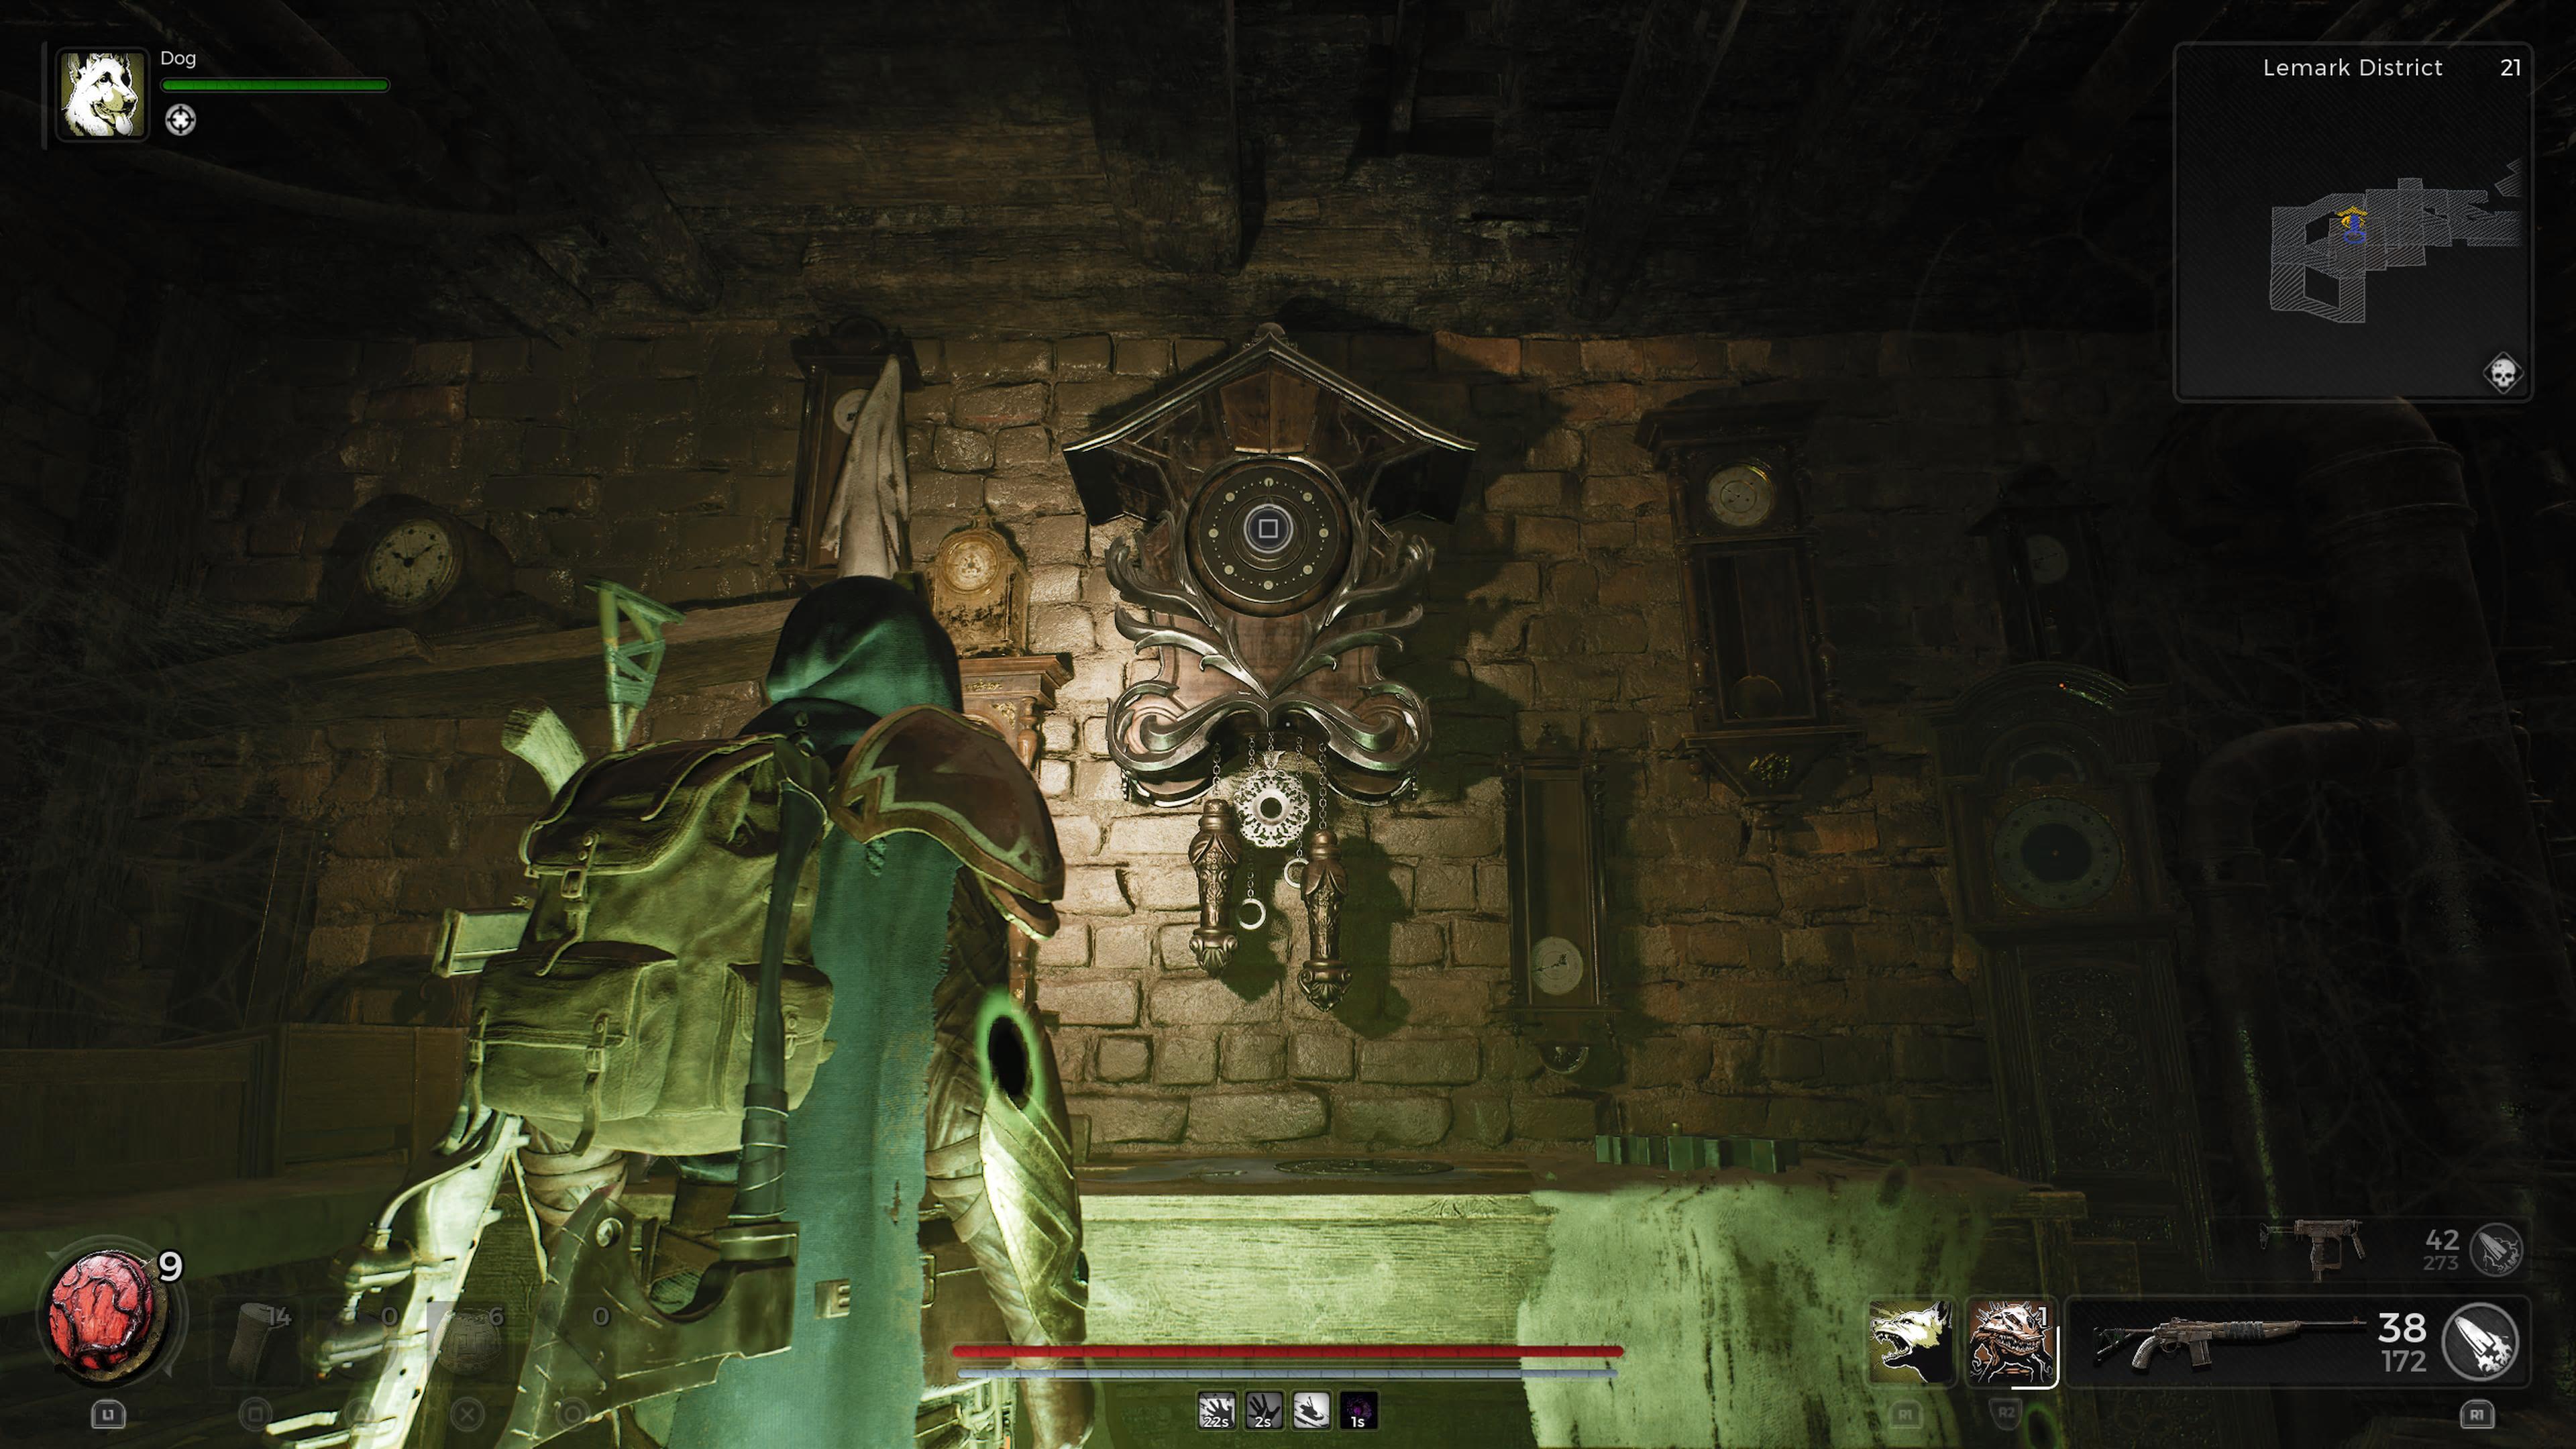 Remnant 2: How to Solve the Lemark District Clock Puzzle - IMPROVE-NEWS ...